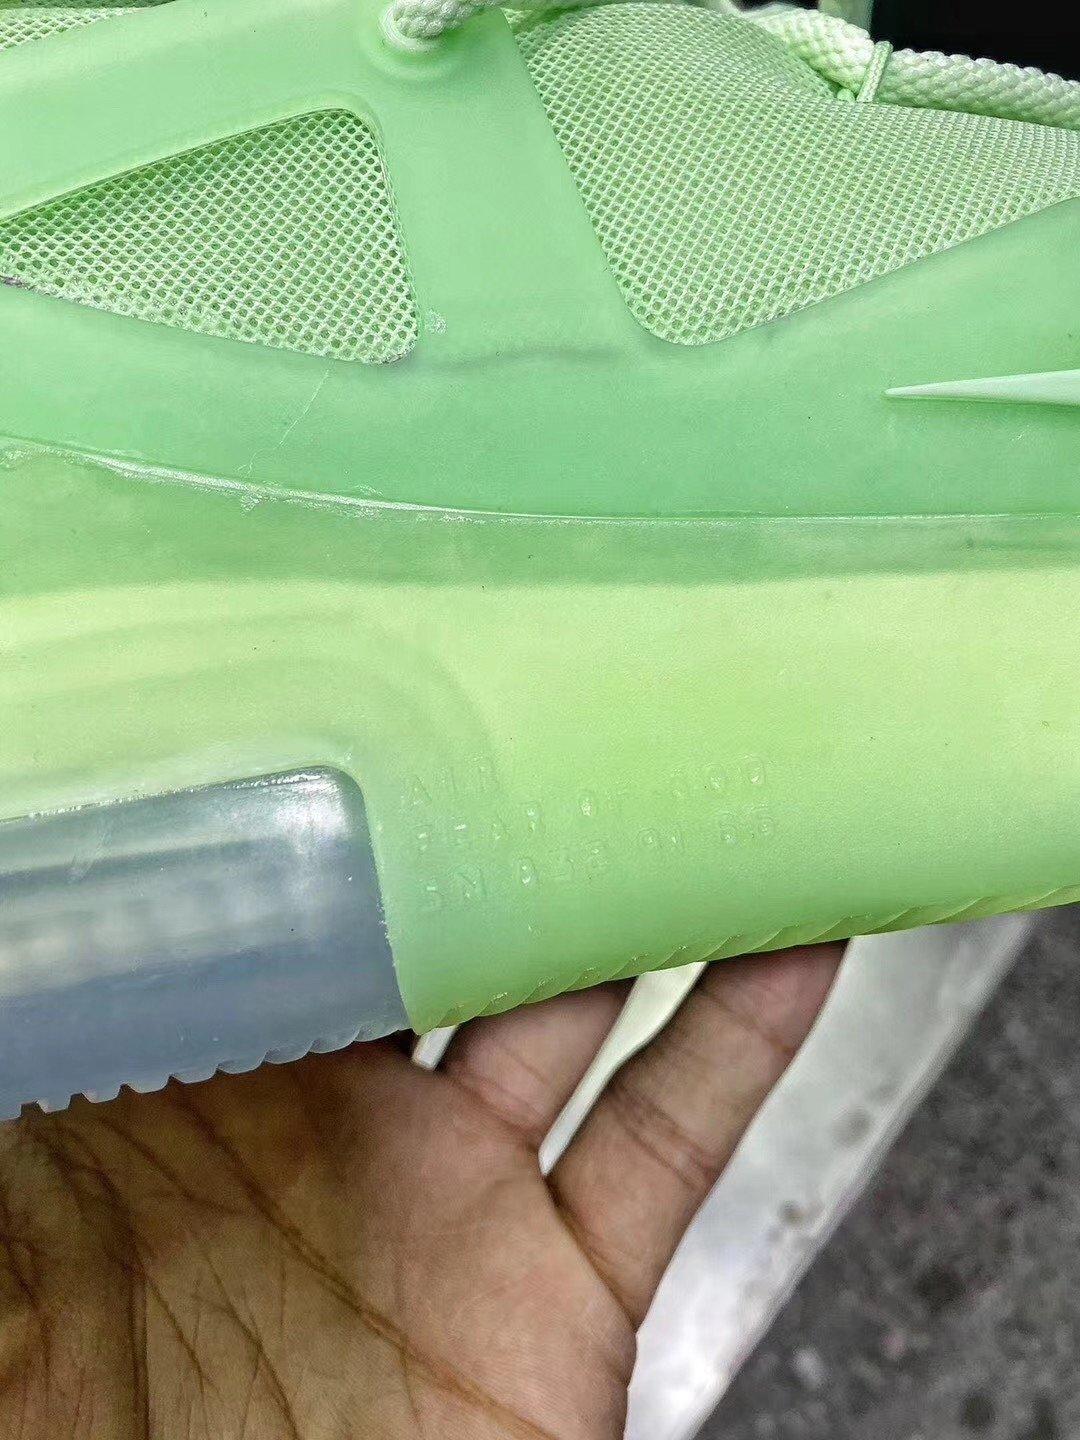 Air Fear of God 1 Green Perfect Version Released